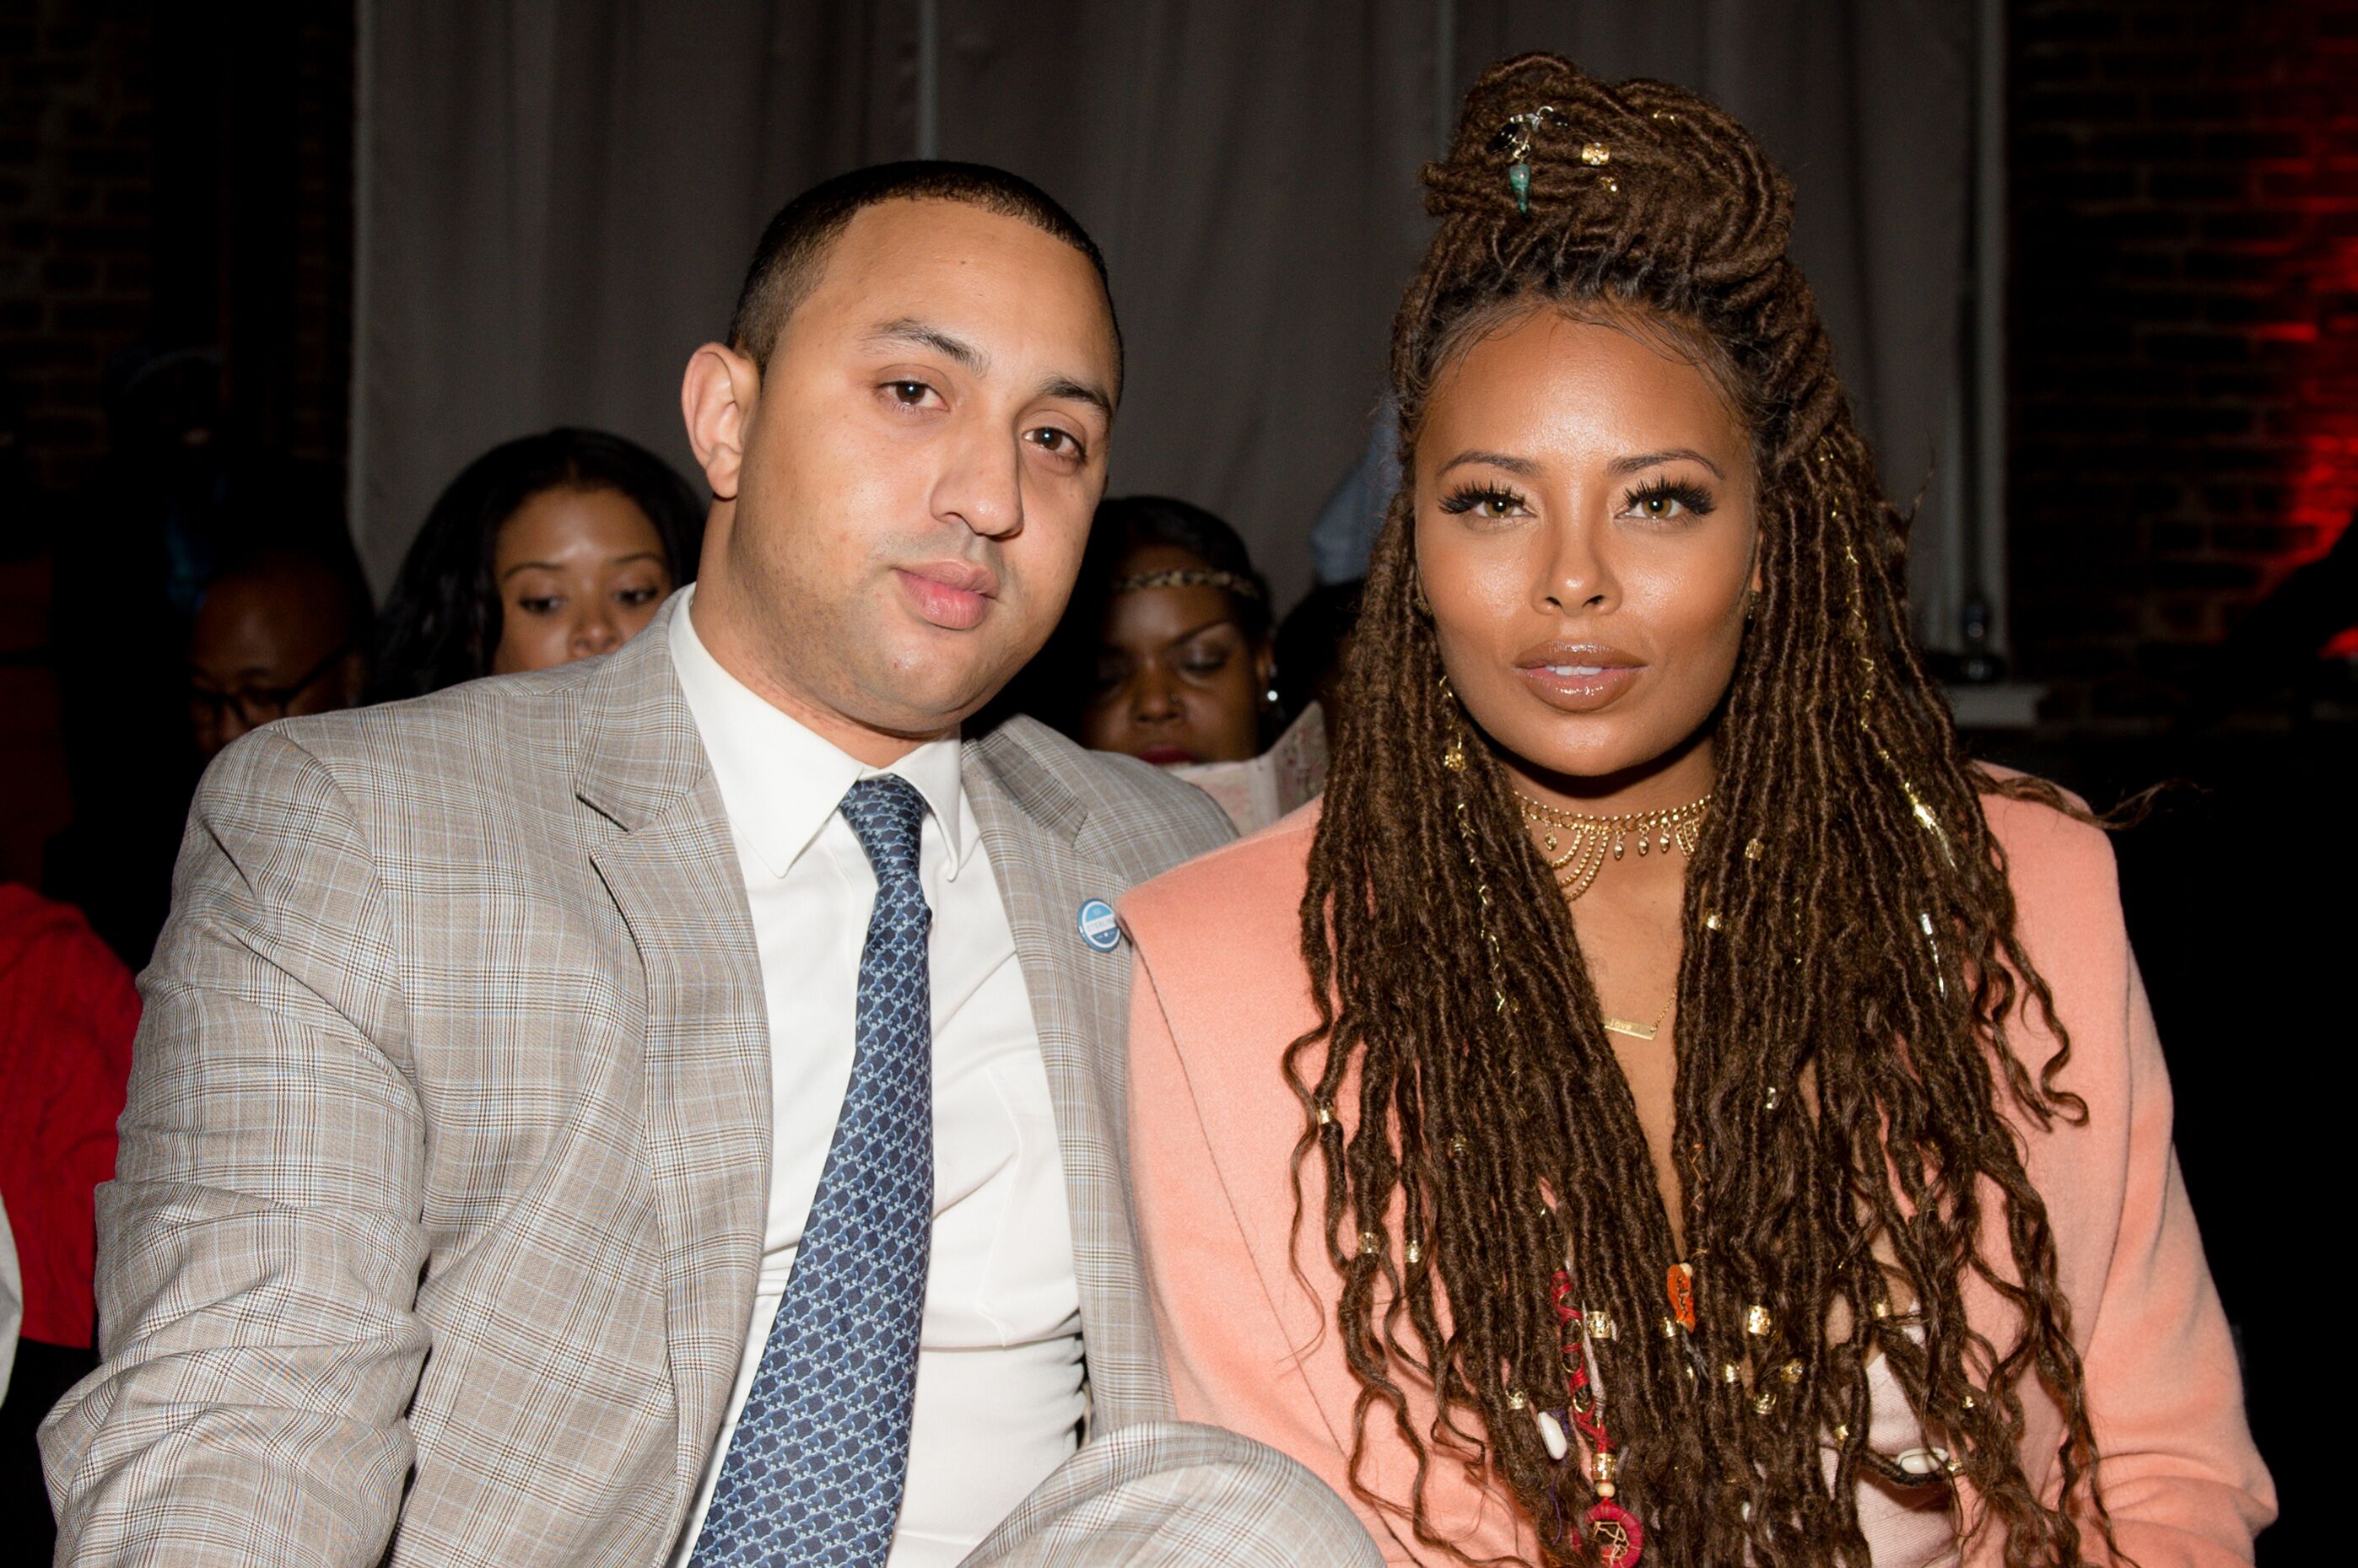 Eva Marcille and Michael Sterling attend an event together | Source: Getty Images/GlobalImagesUkraine